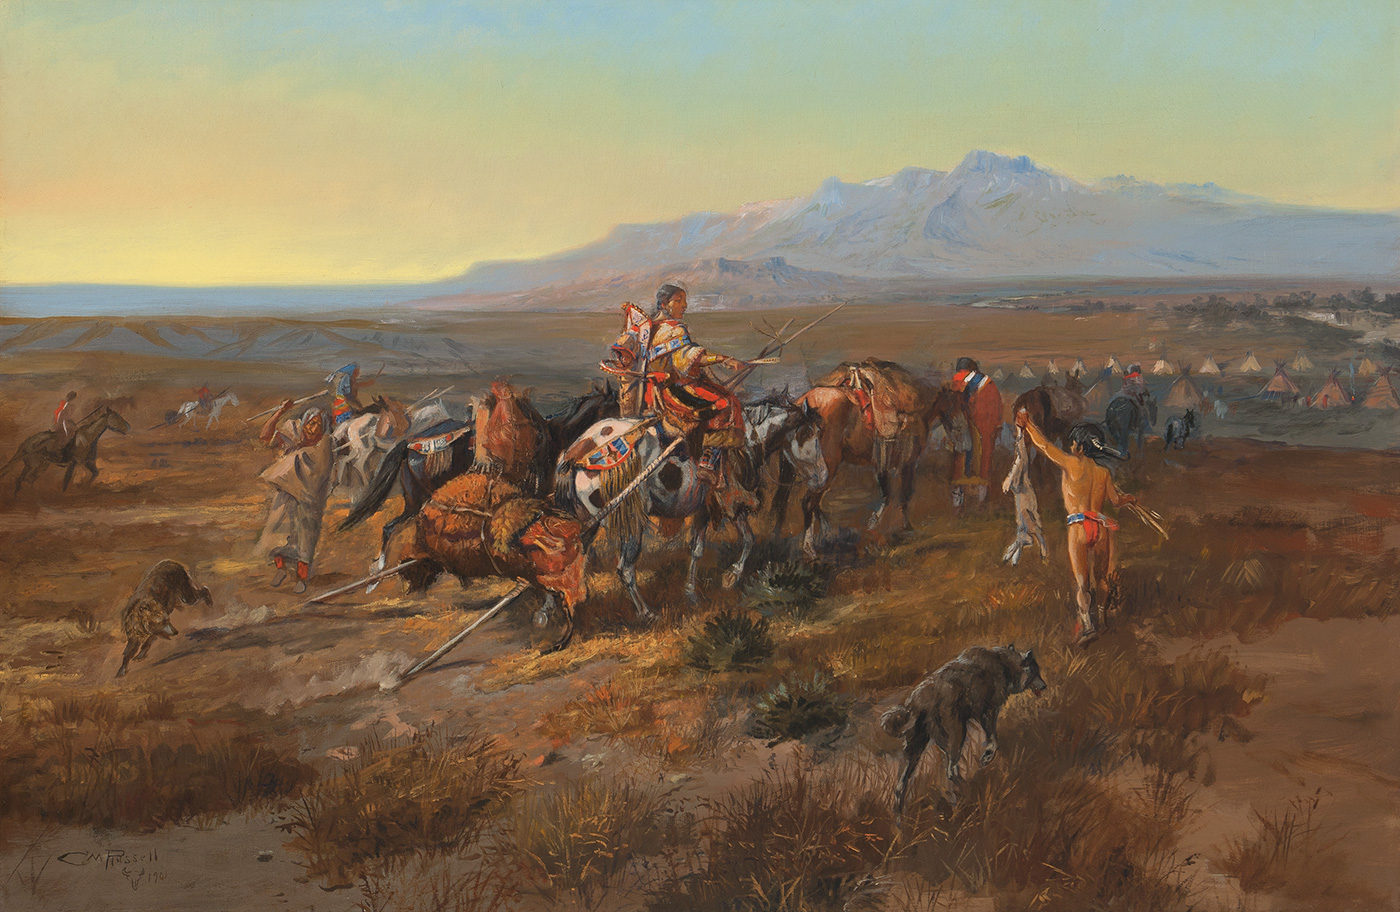 A group of indigenous American women and a child ride horses through a landscape with mountains in the distance.